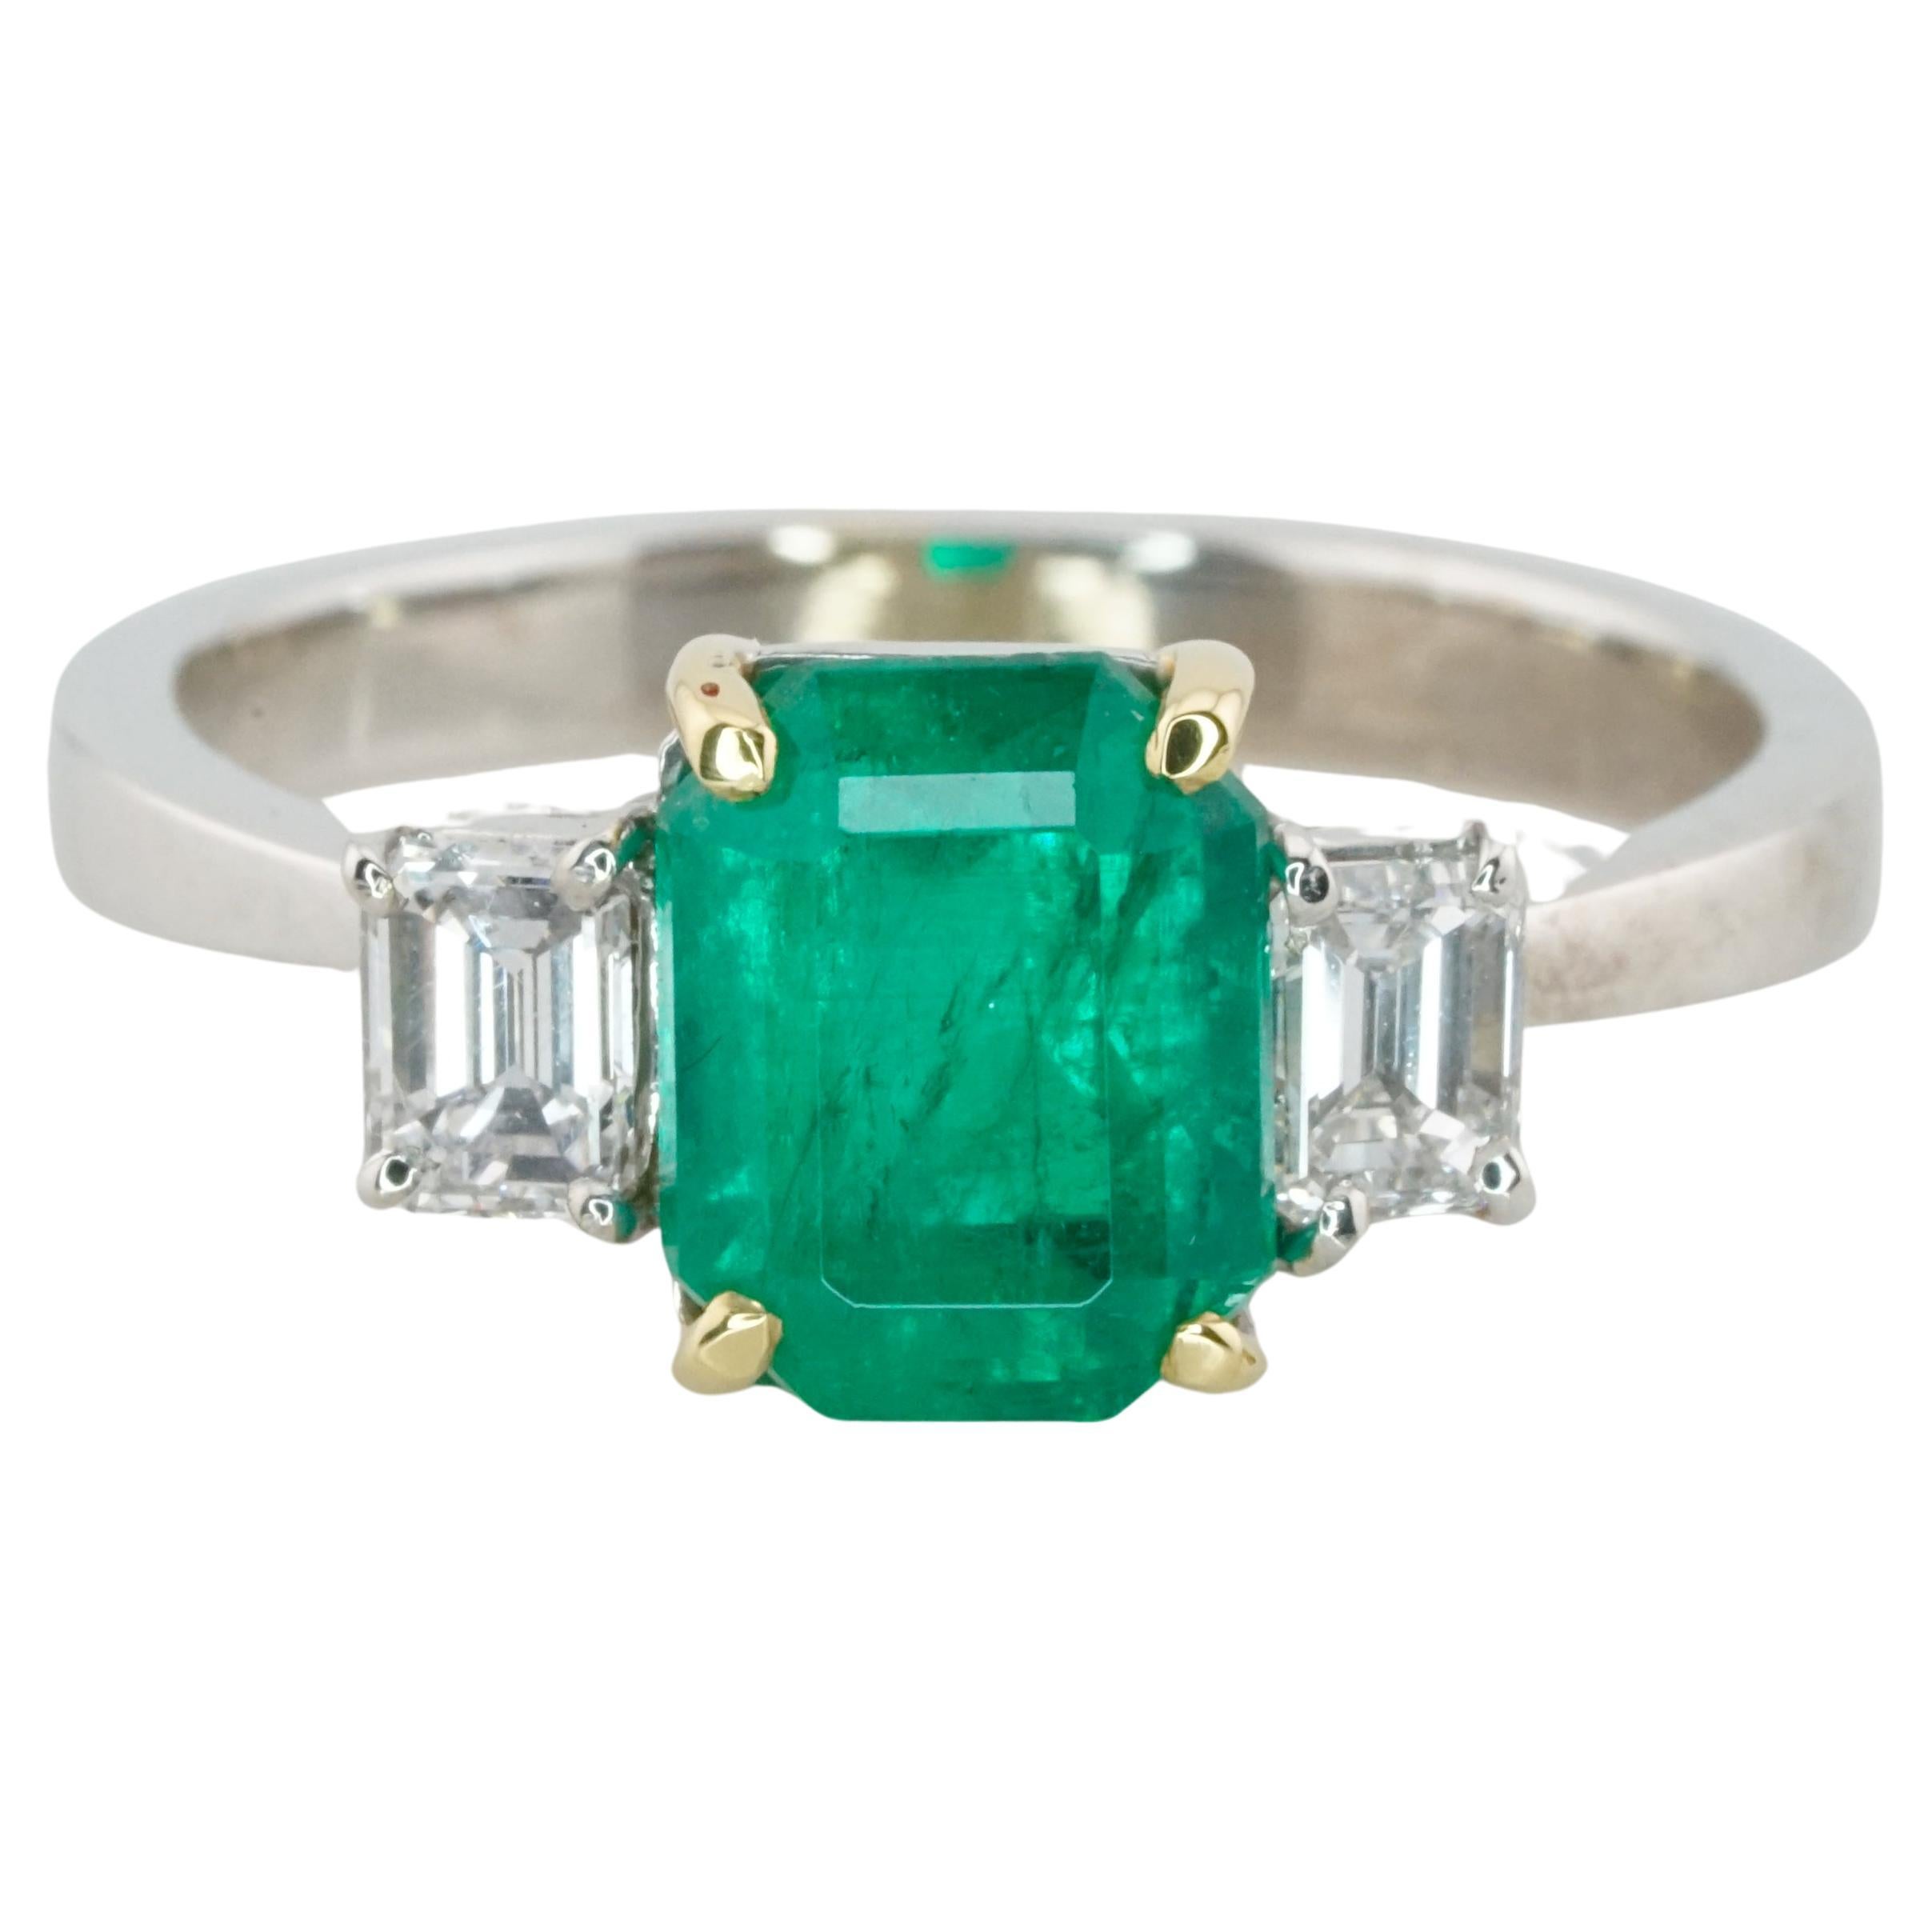 AIGS Certified 2.12 Carat Vivid Green Colombian Emerald 18K White Gold Ring For Sale